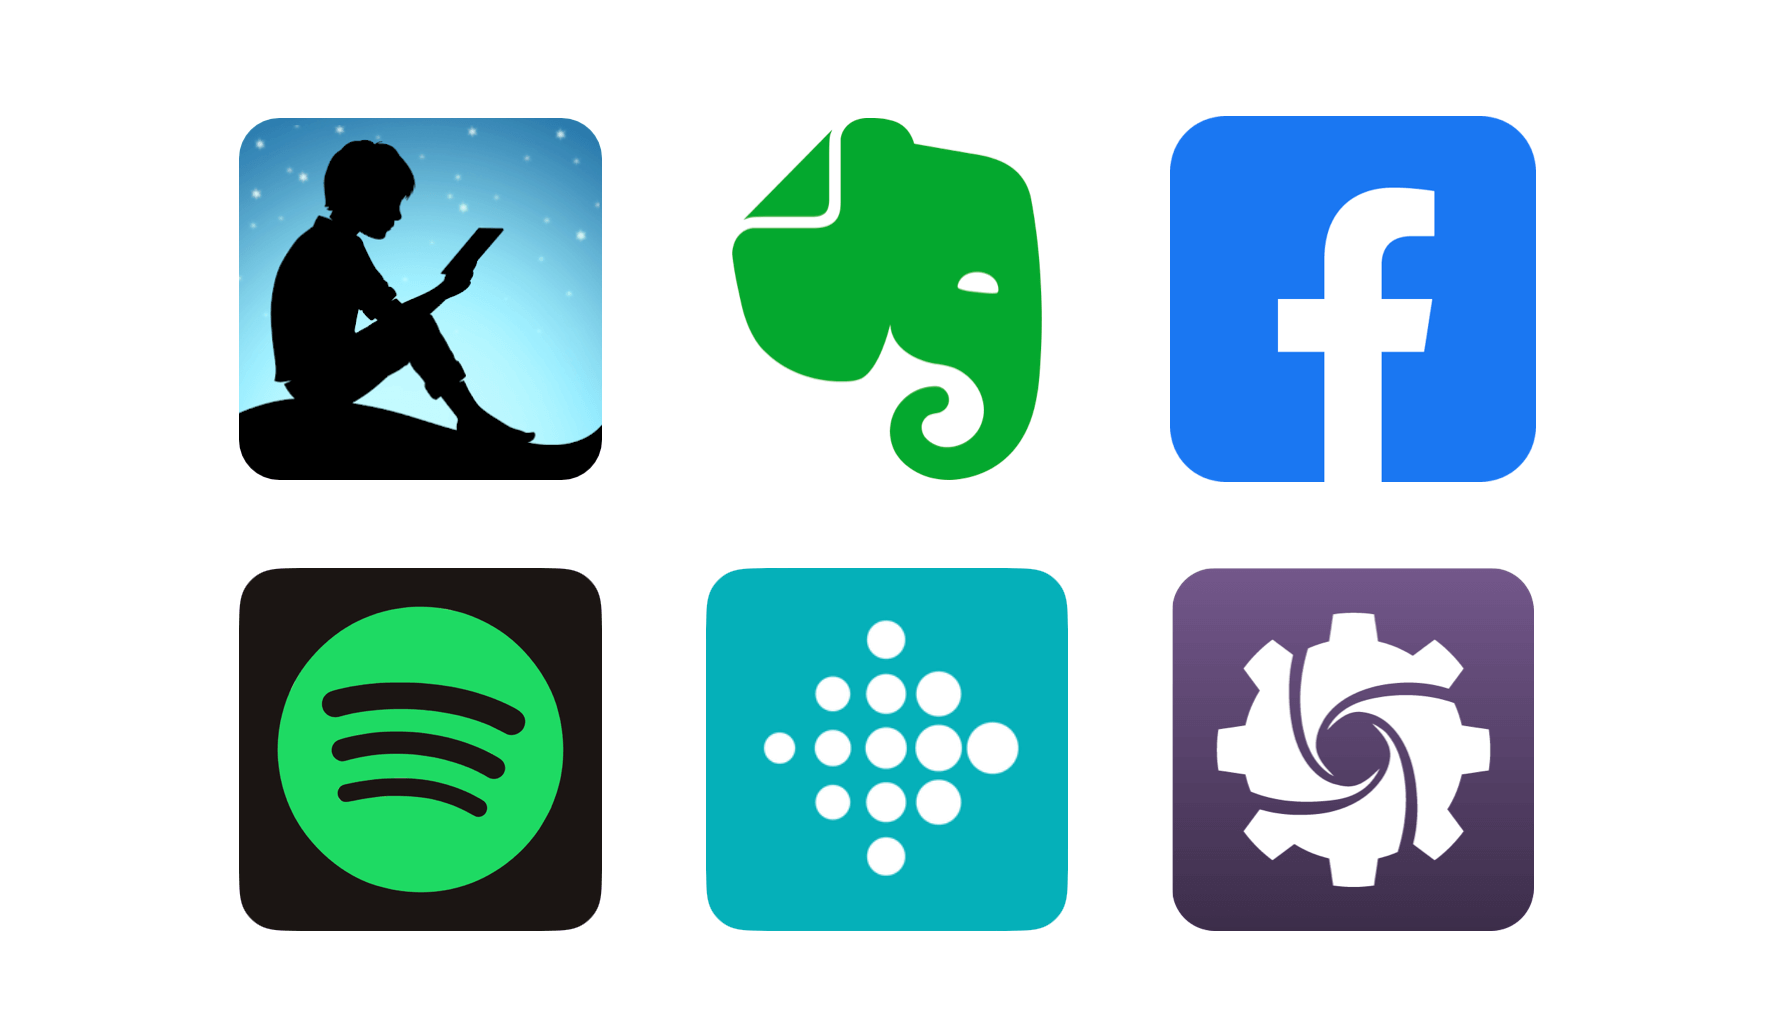 Examples of Accessible Mobile Apps